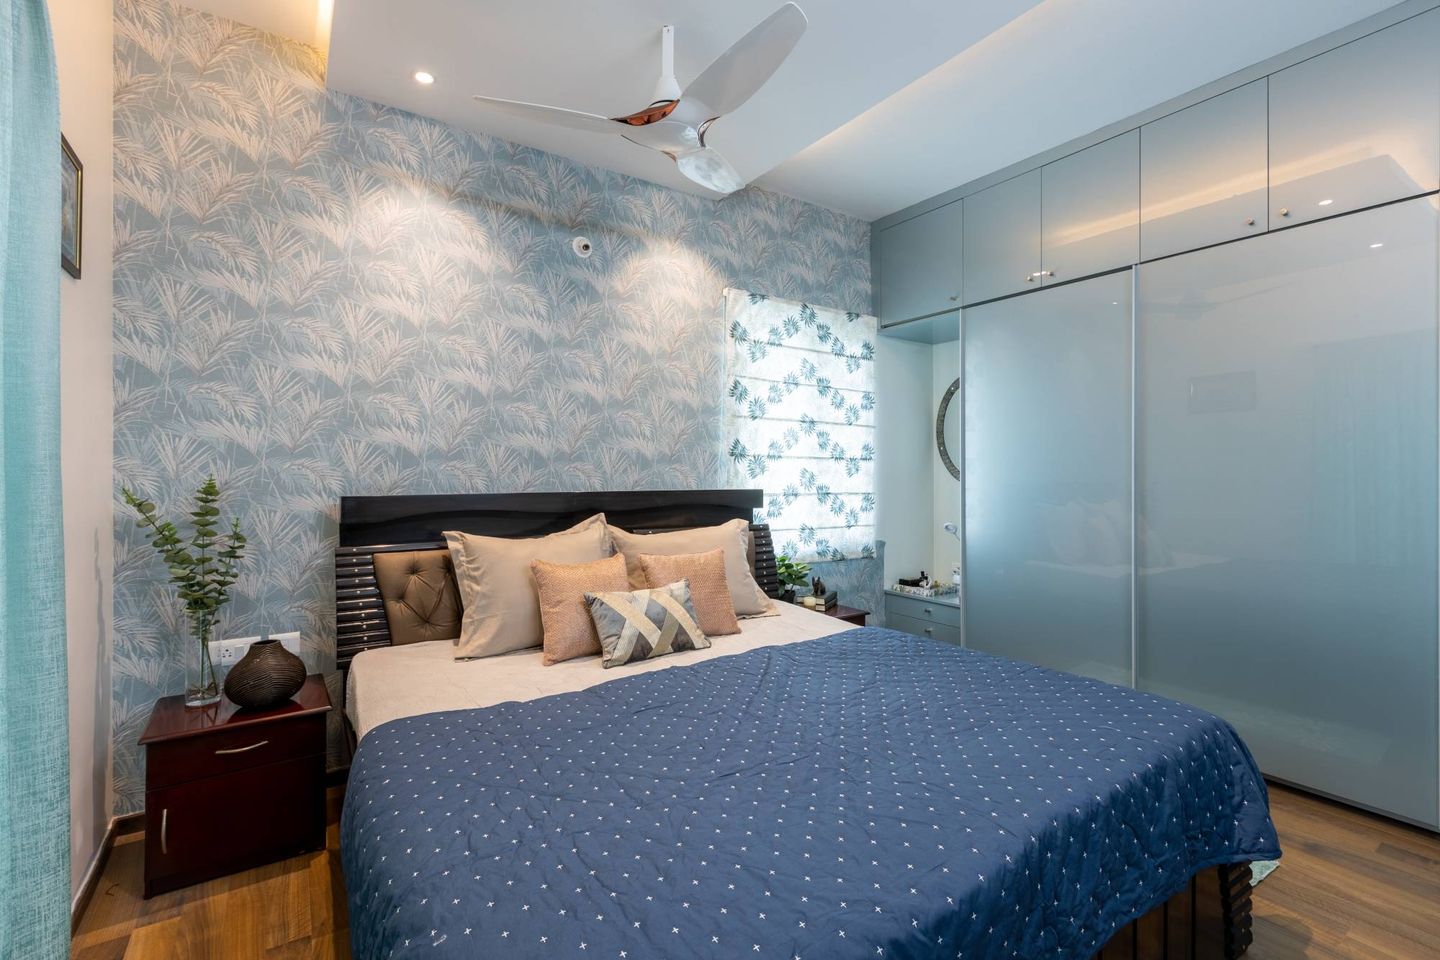 Contemporary Bedroom Design With A King Size Bed And Wooden Side Tables